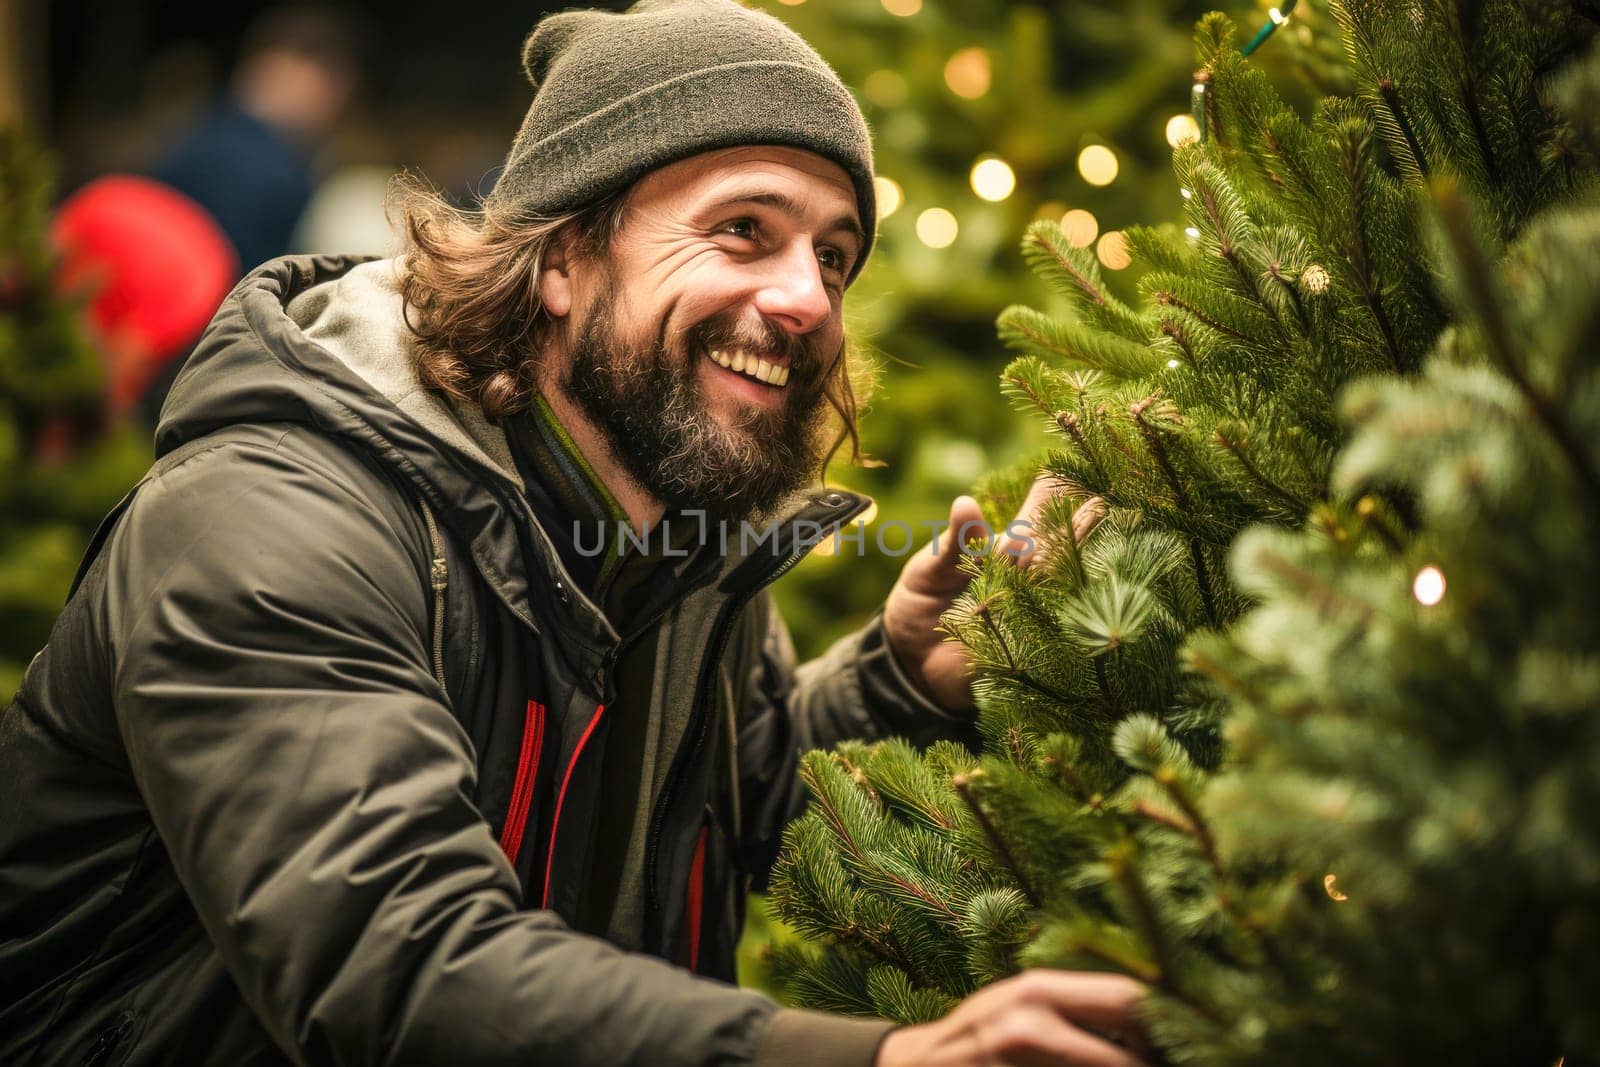 A man who carefully searches for the perfect Christmas tree in a bright and atmospheric Christmas tree market to create a festive atmosphere.